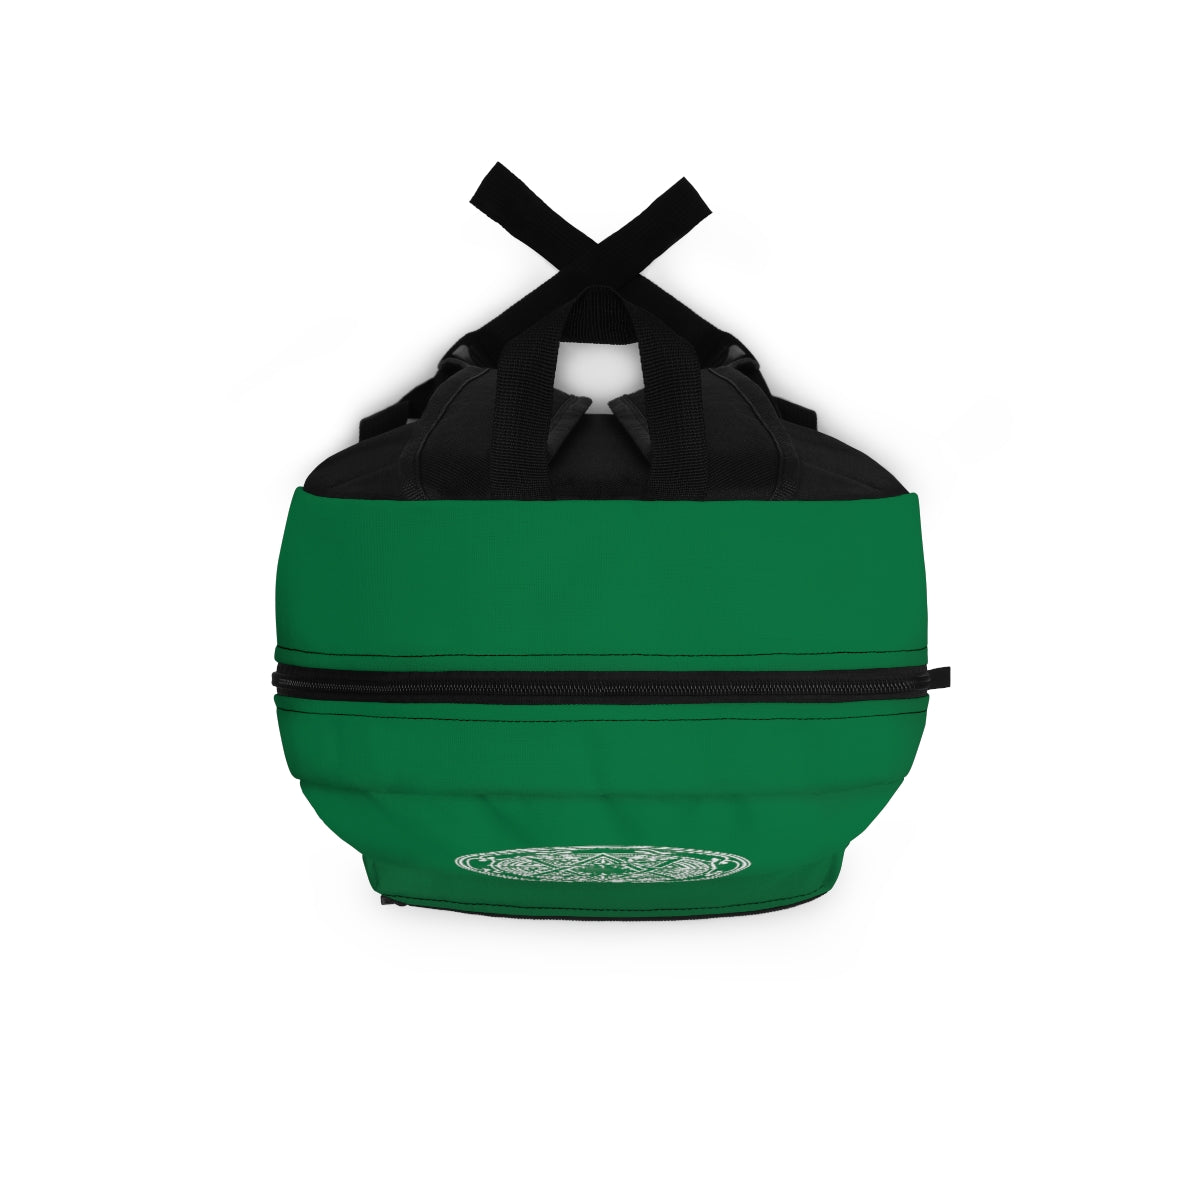 Echo's  Backpack With Octagram  (Green)